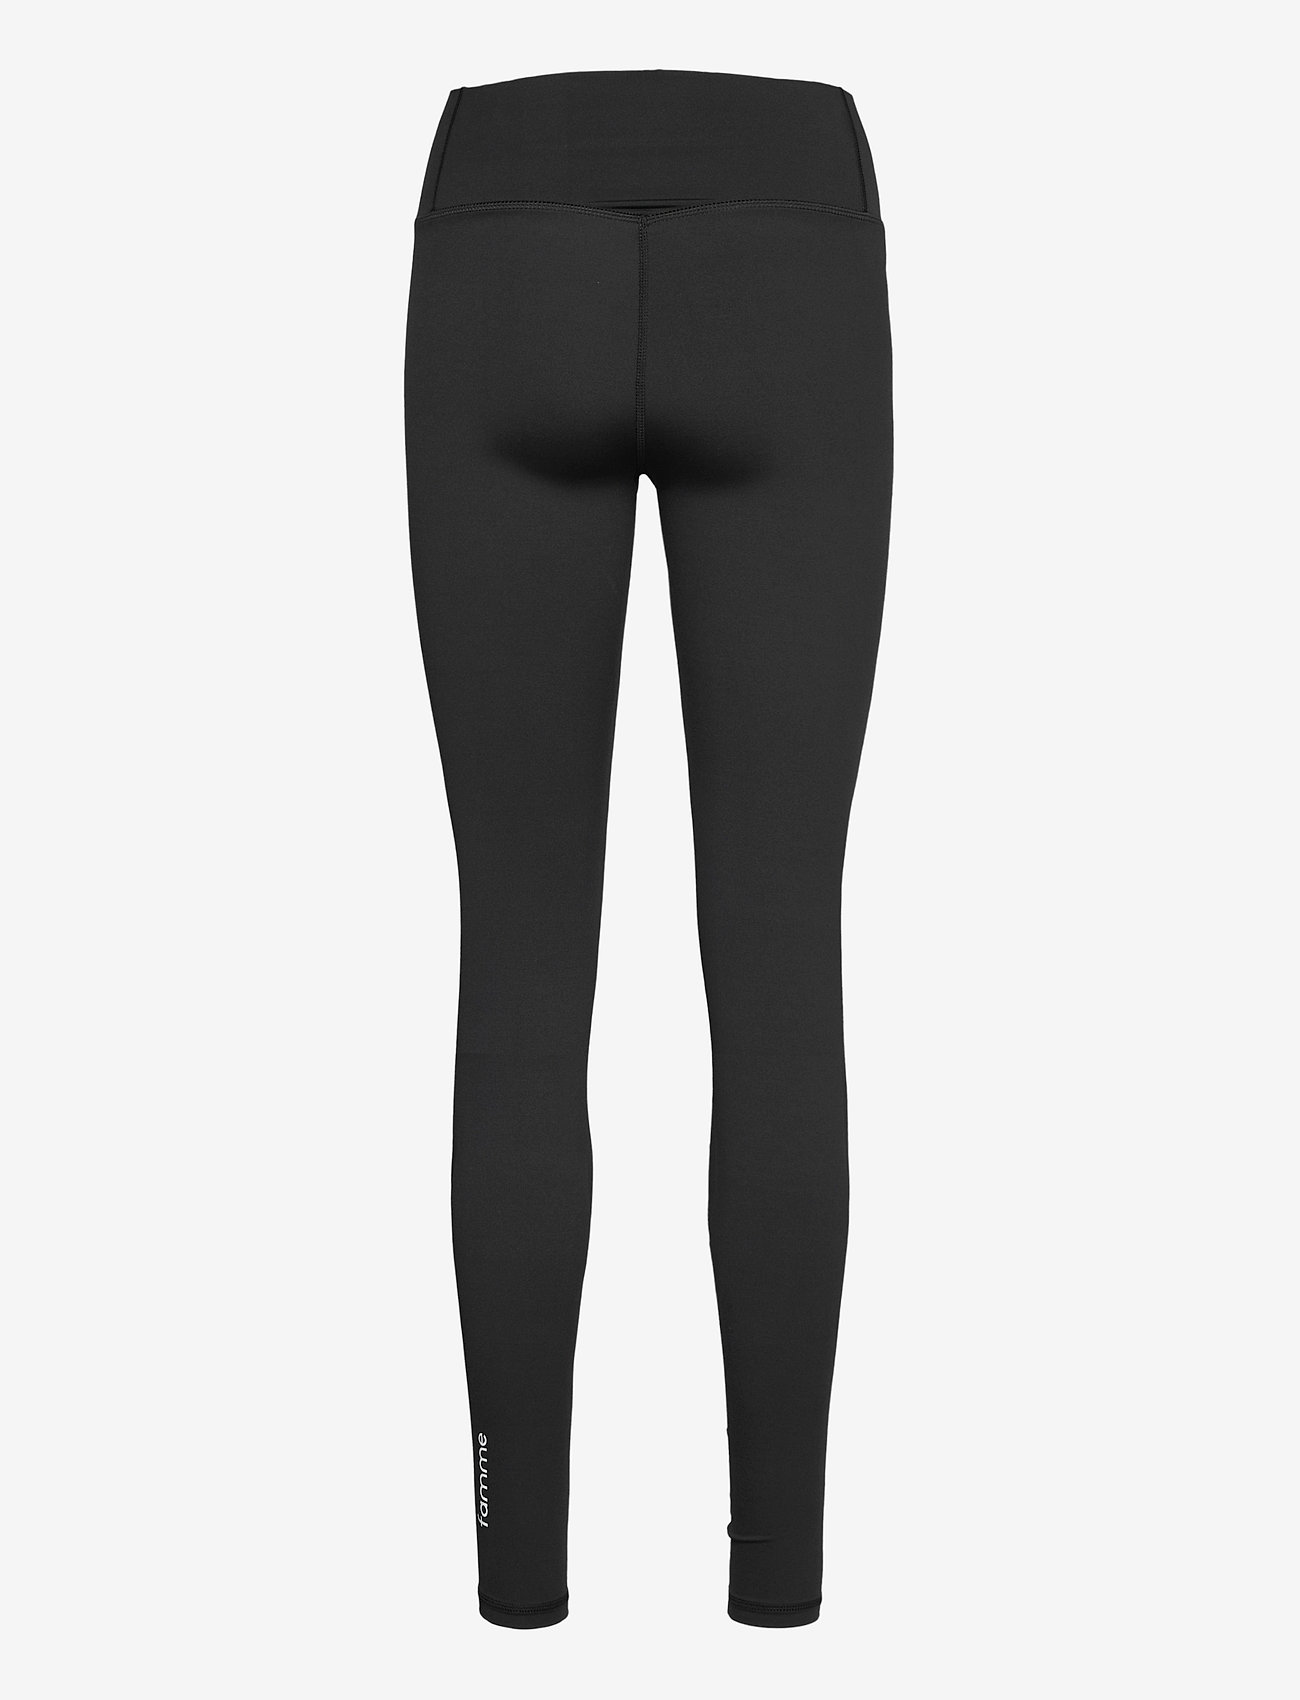 Famme - Essential Tights - running & training tights - black - 1